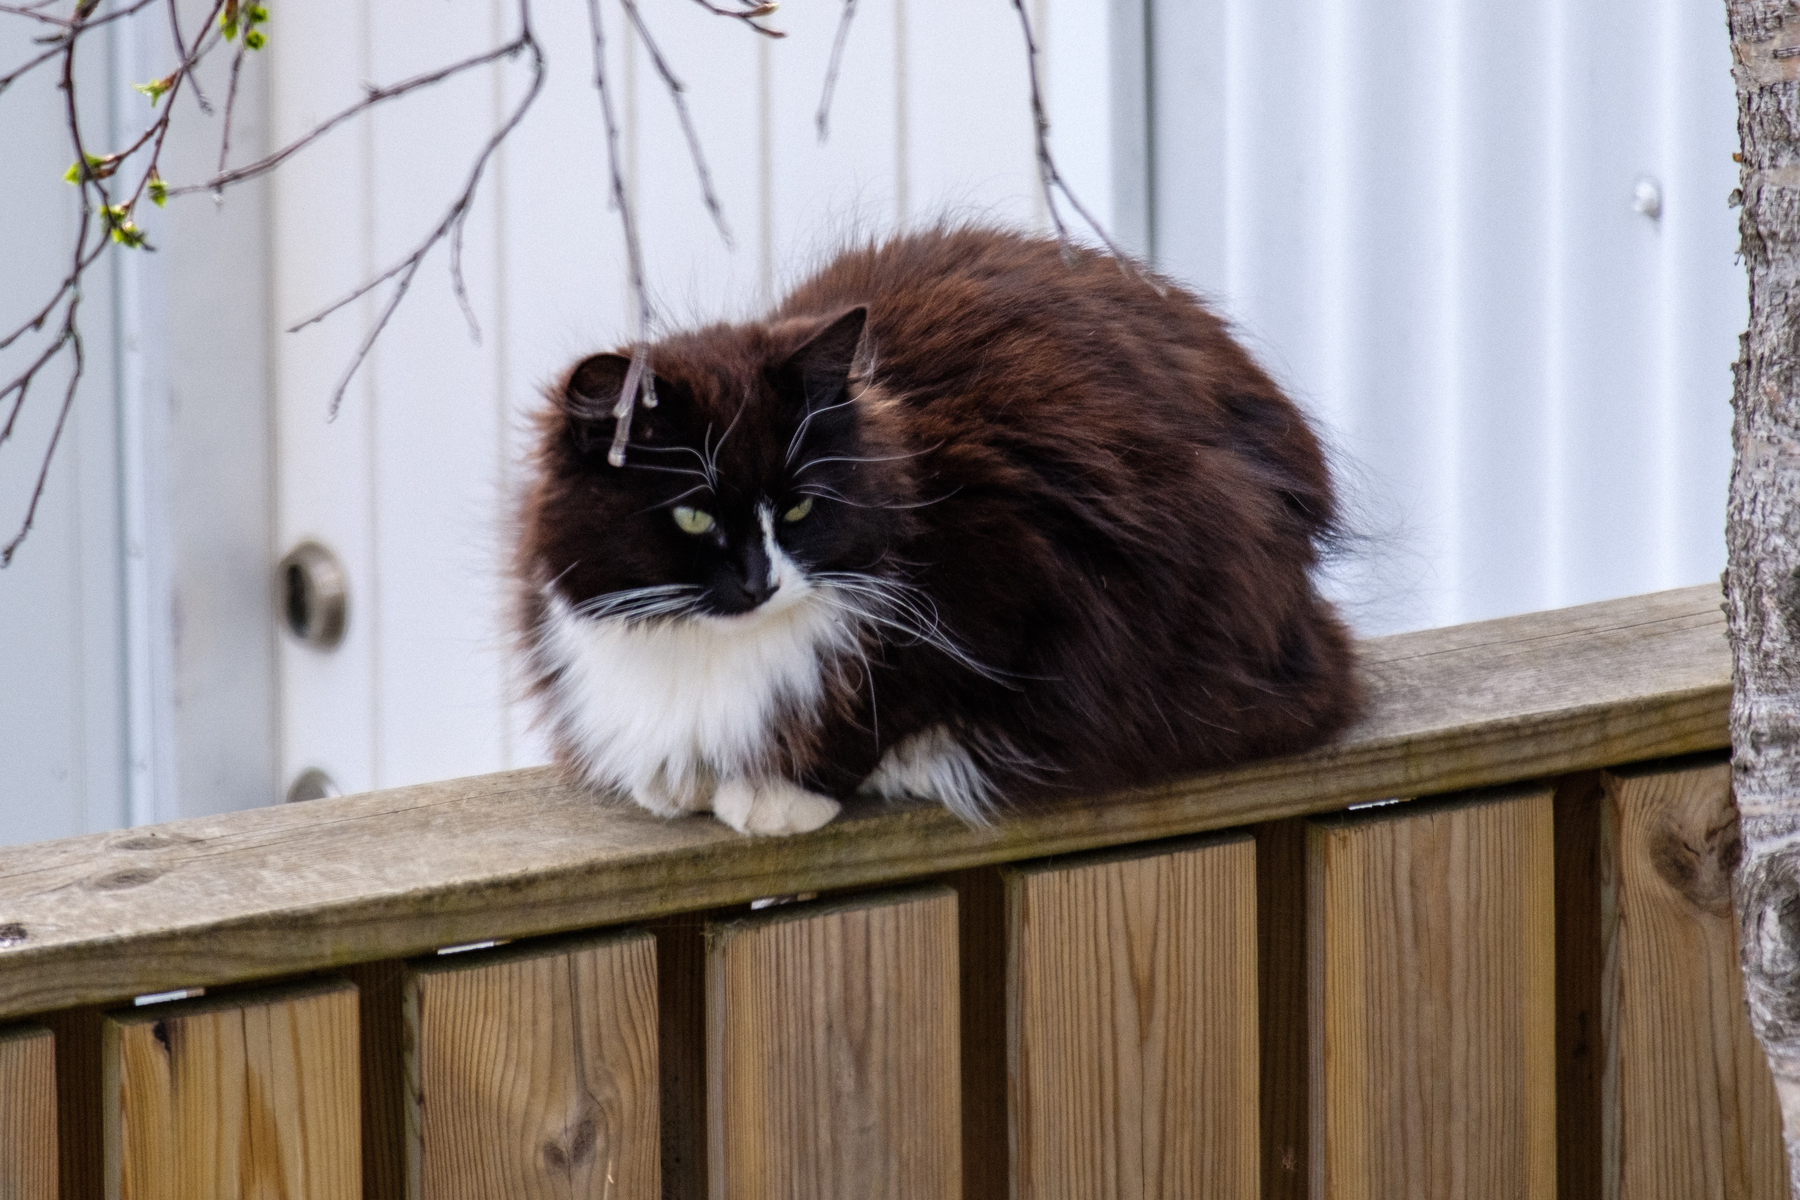 That same neighbour cat loafing on the fence, inspecting the surroundings